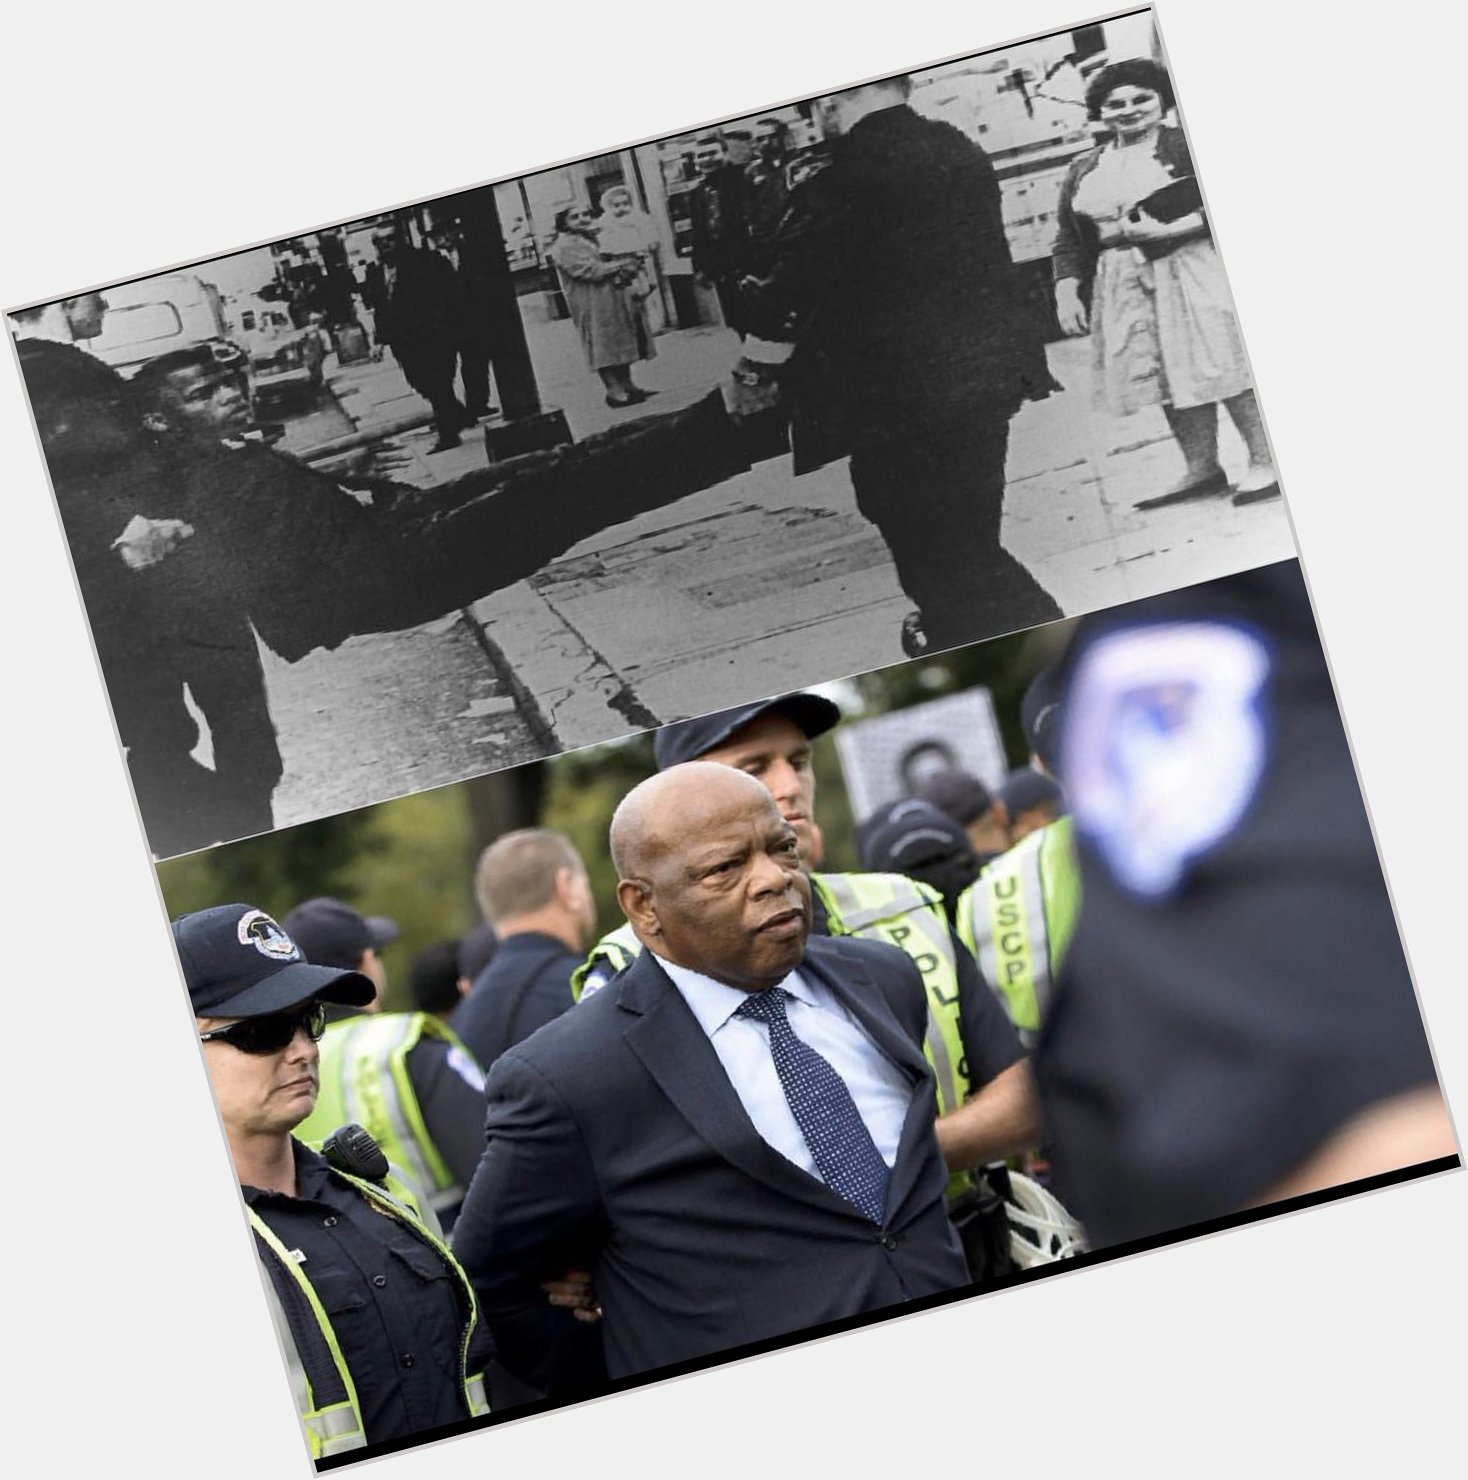 Happy Birthday to a true ICON Rep. John Lewis! He s been fighting the good fight for 80 years!  